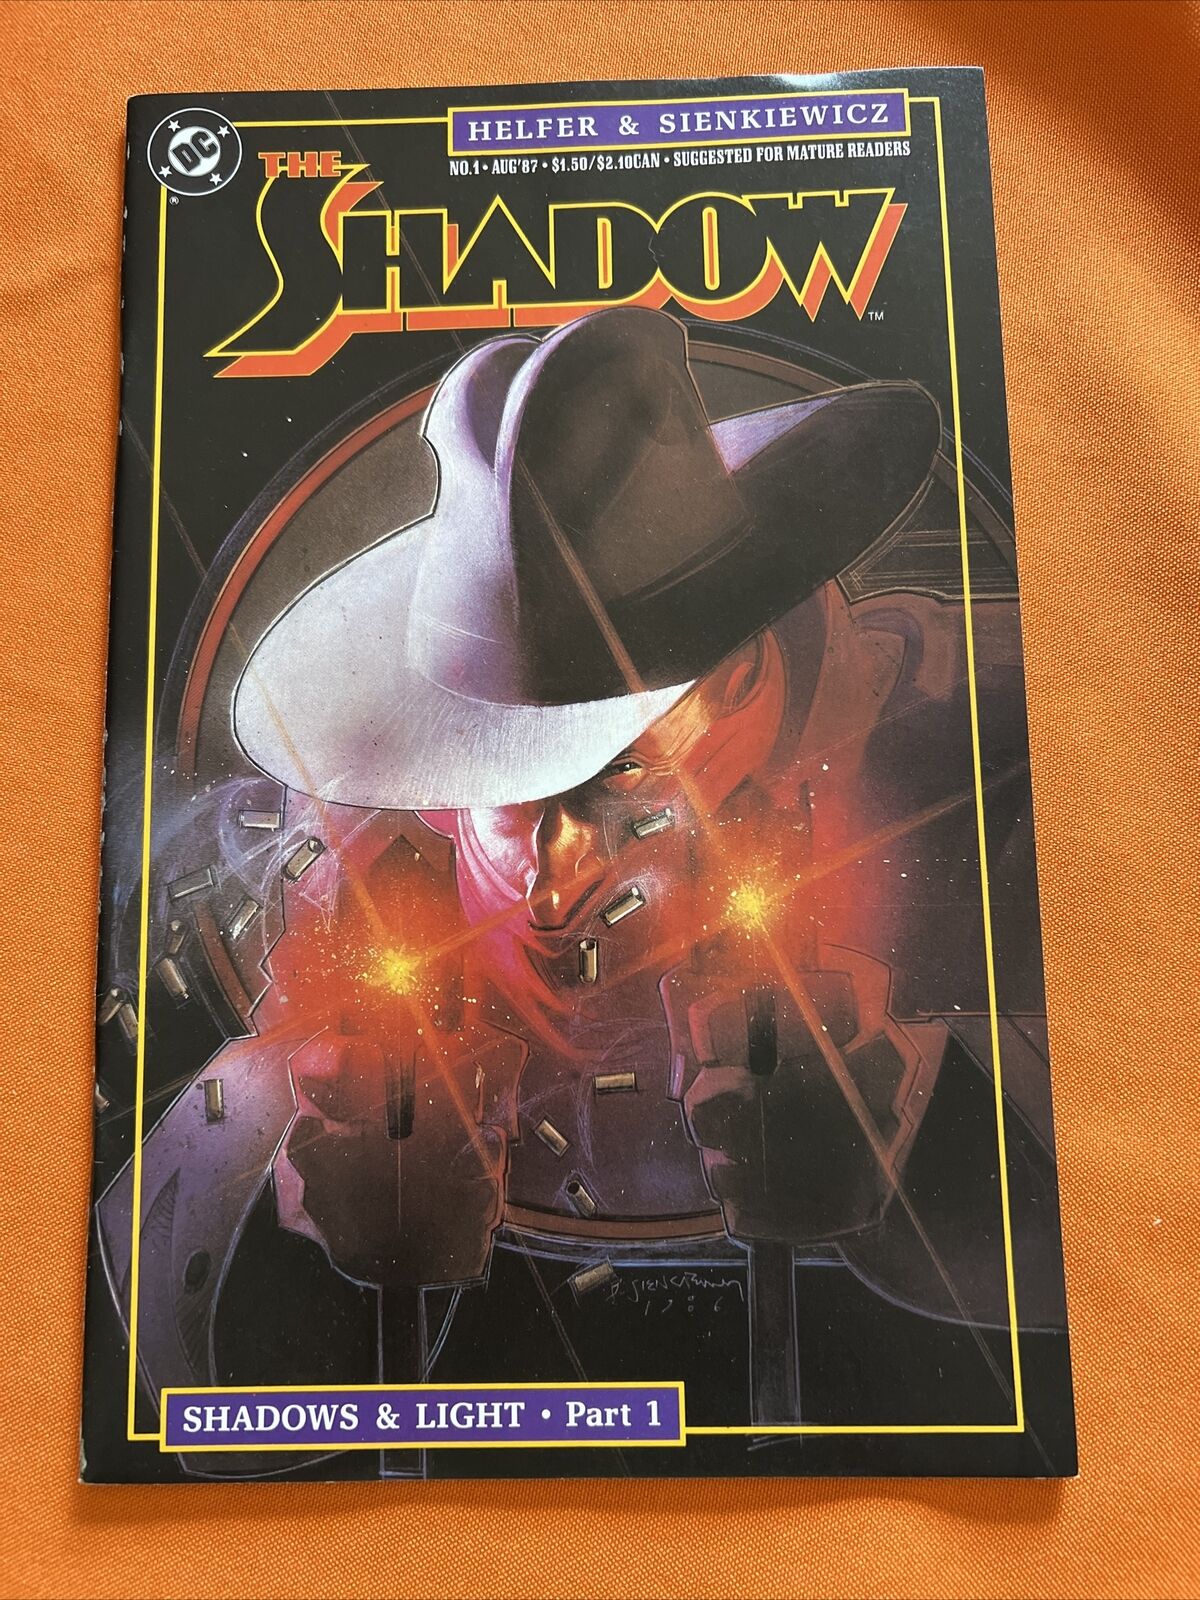 DC Comic THE SHADOW No. 1 (Aug 1987) Shadow & Light Part 1 